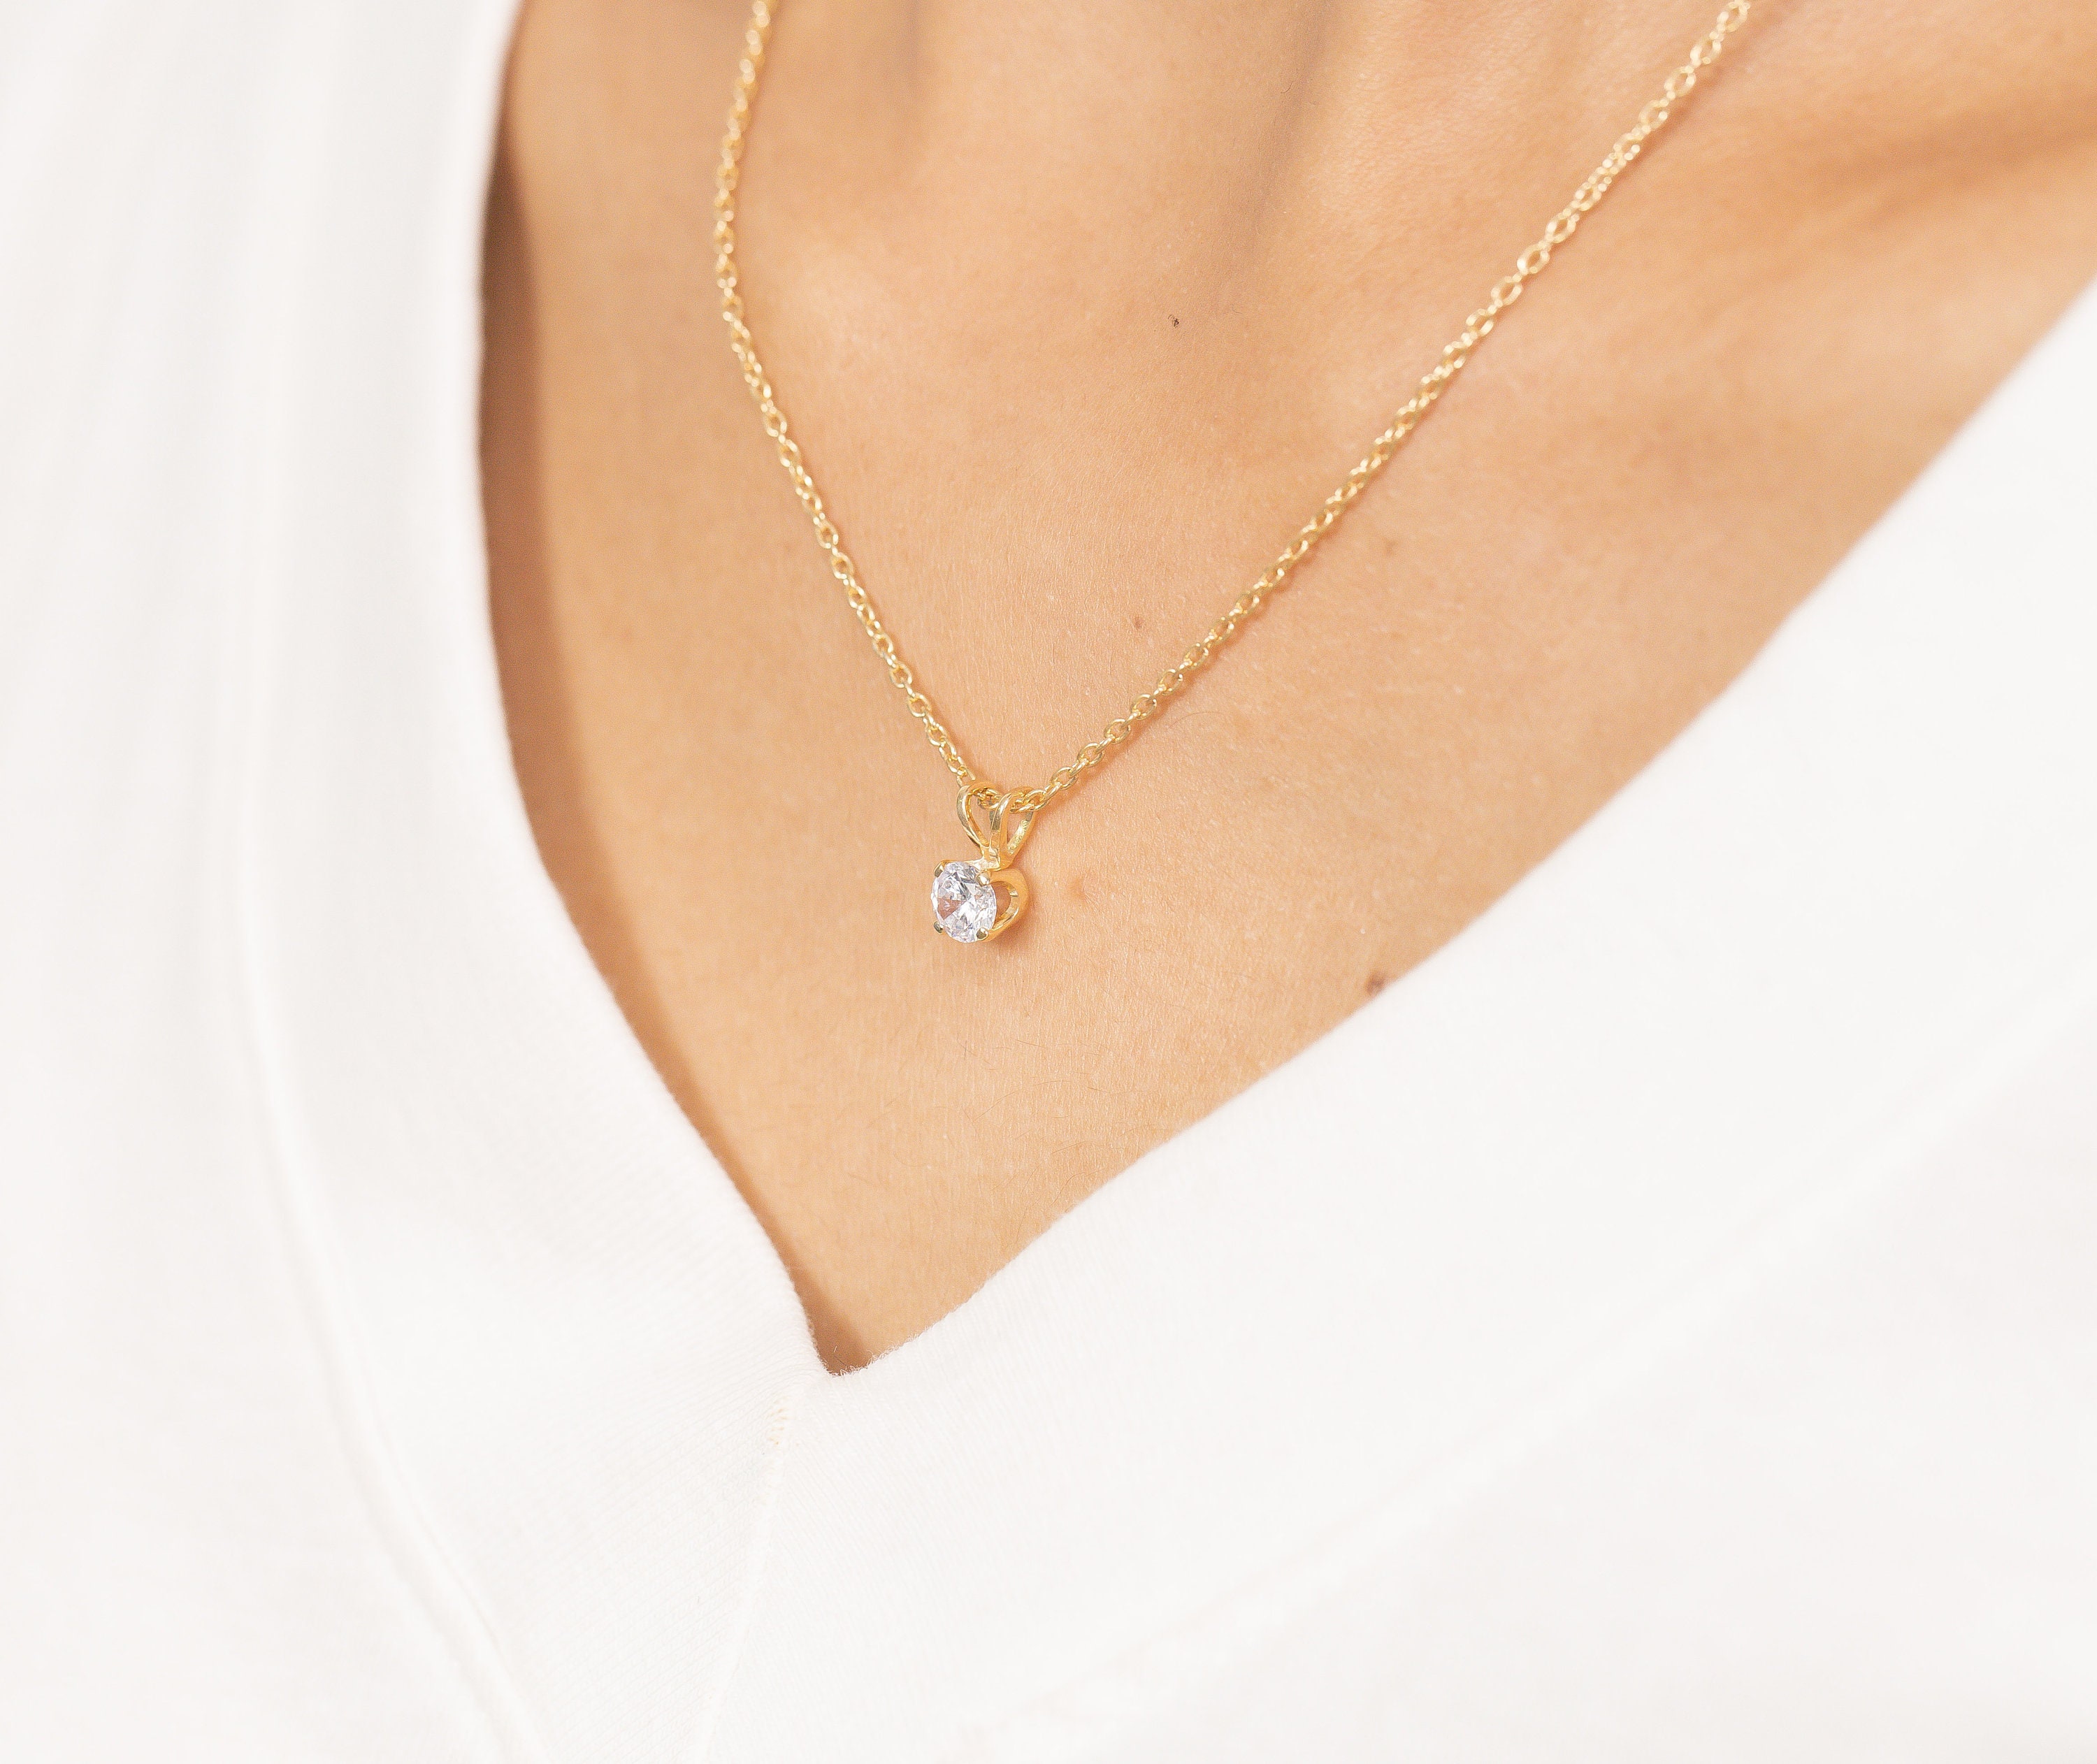 Short Gold Necklace With Diamante Stars 6911 - No Angel